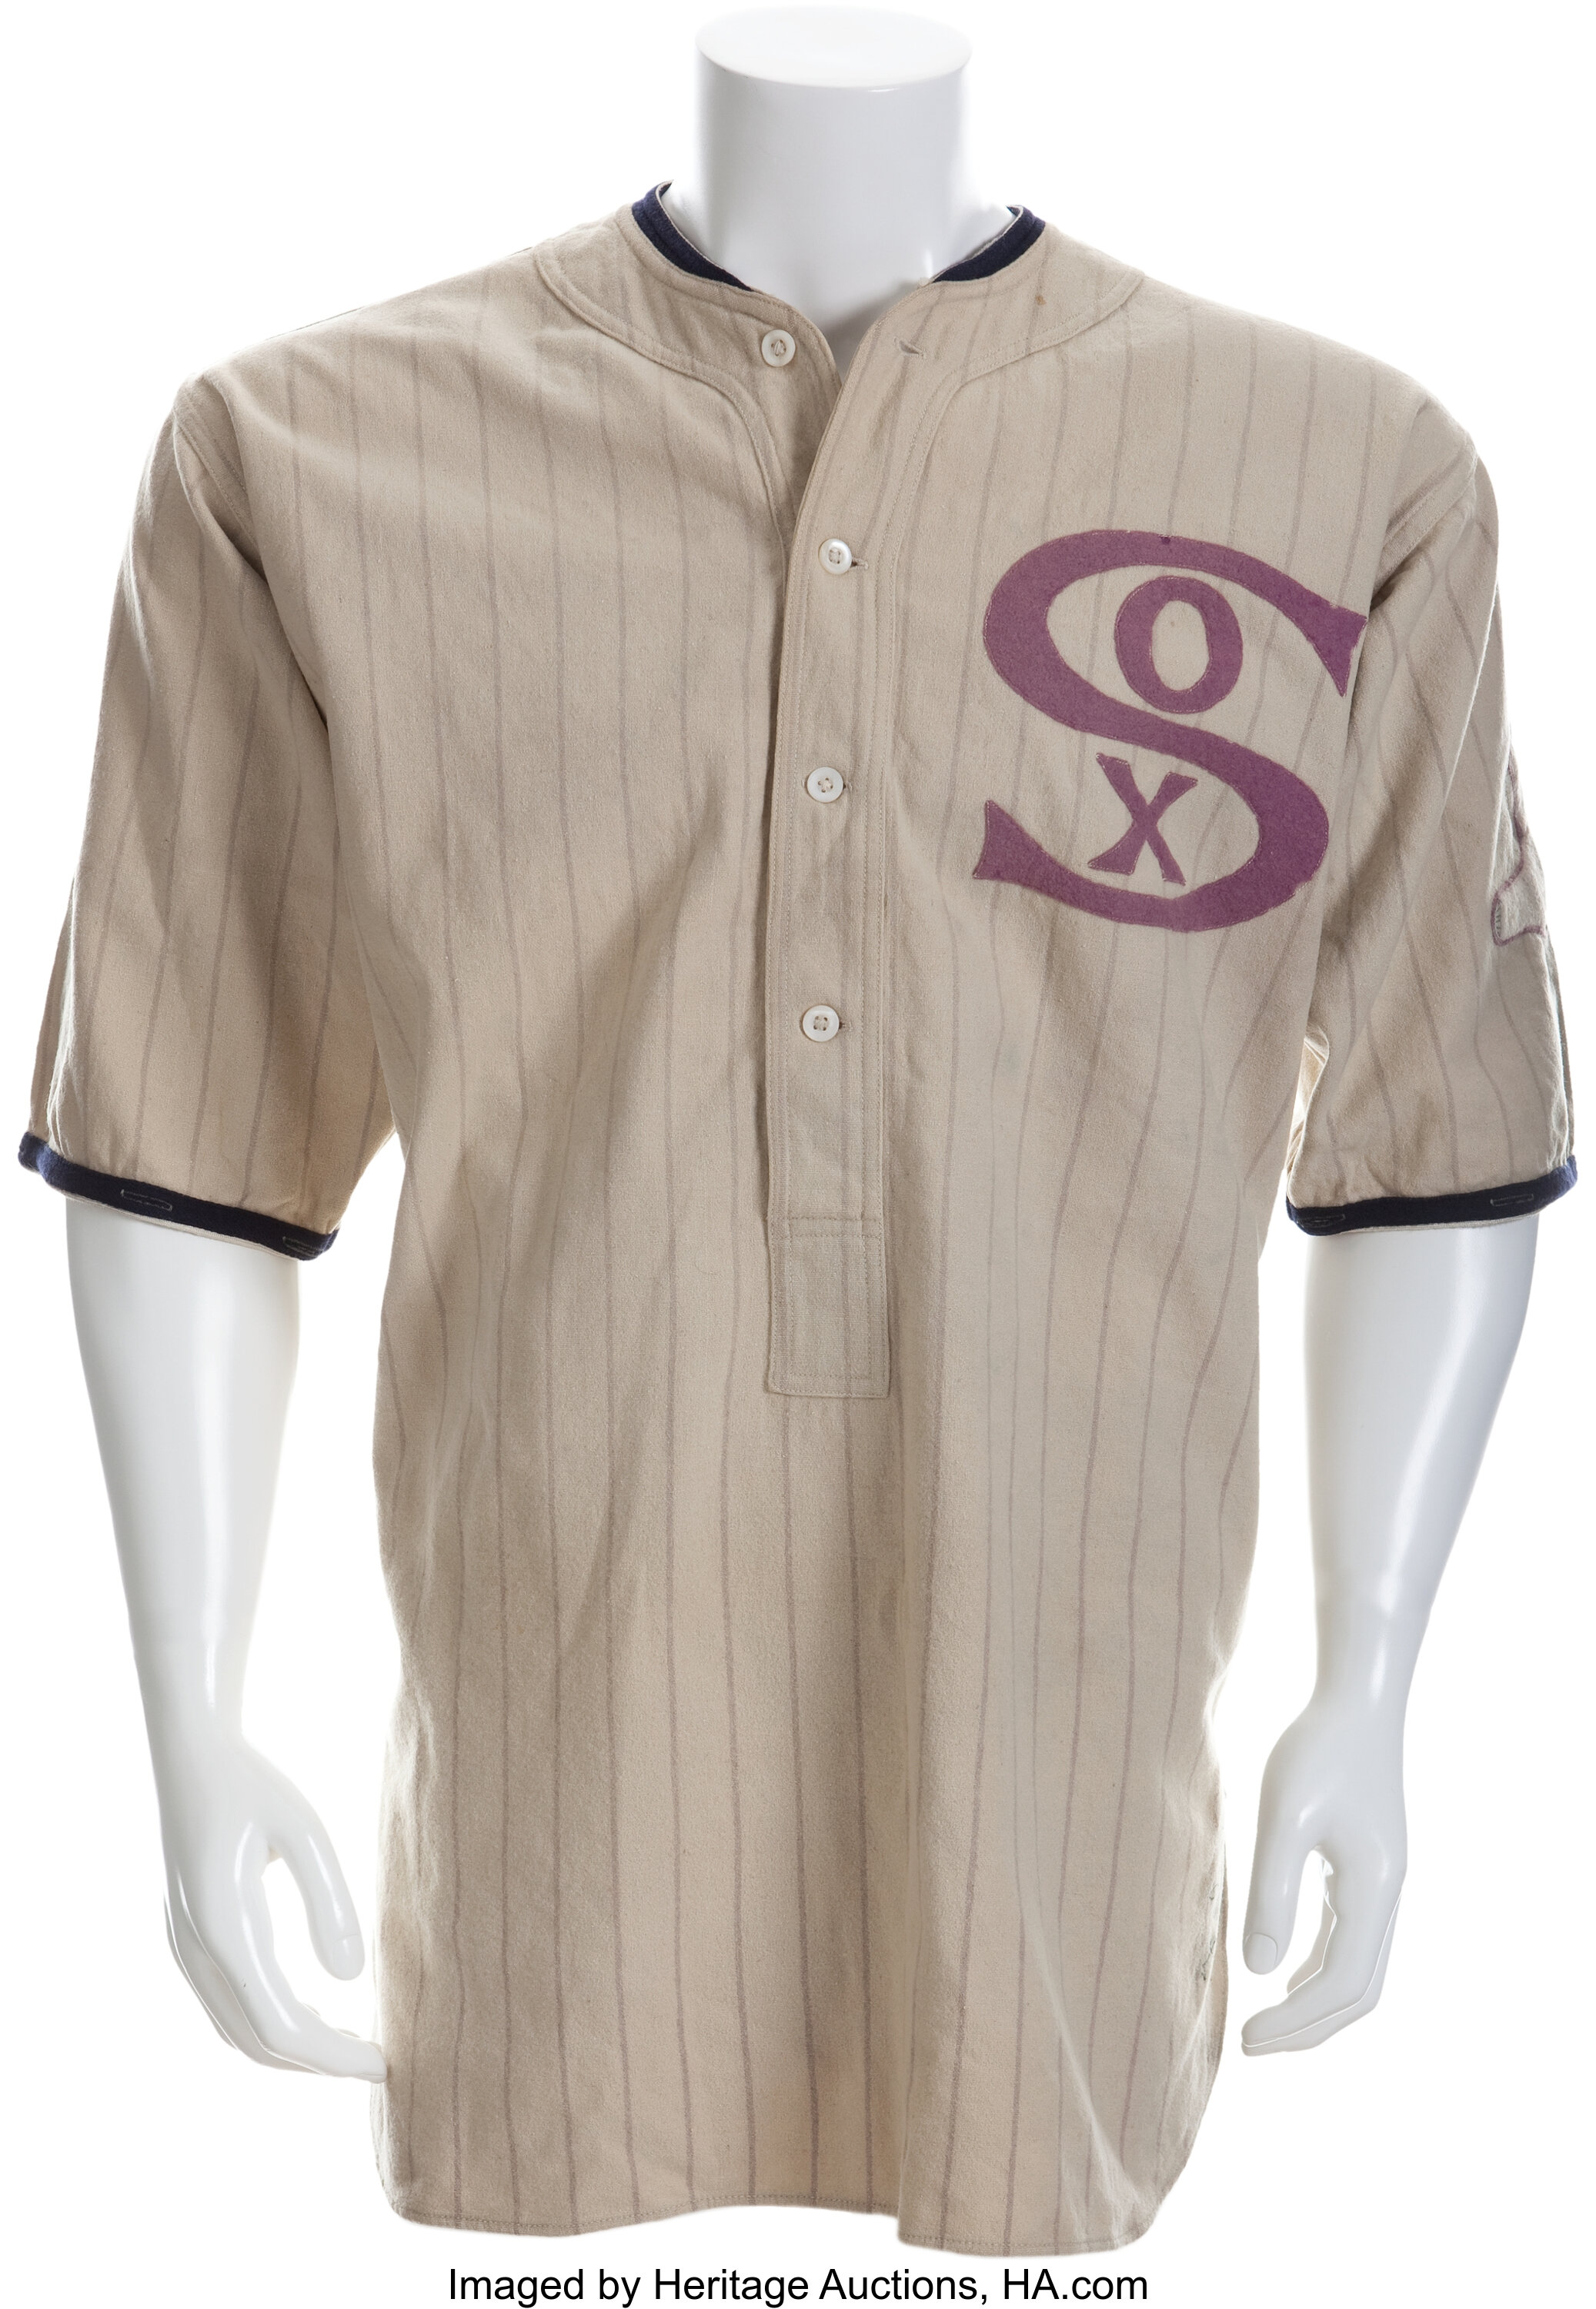 Chicago White Sox 2012 Uniforms, Uniforms to be worn for th…